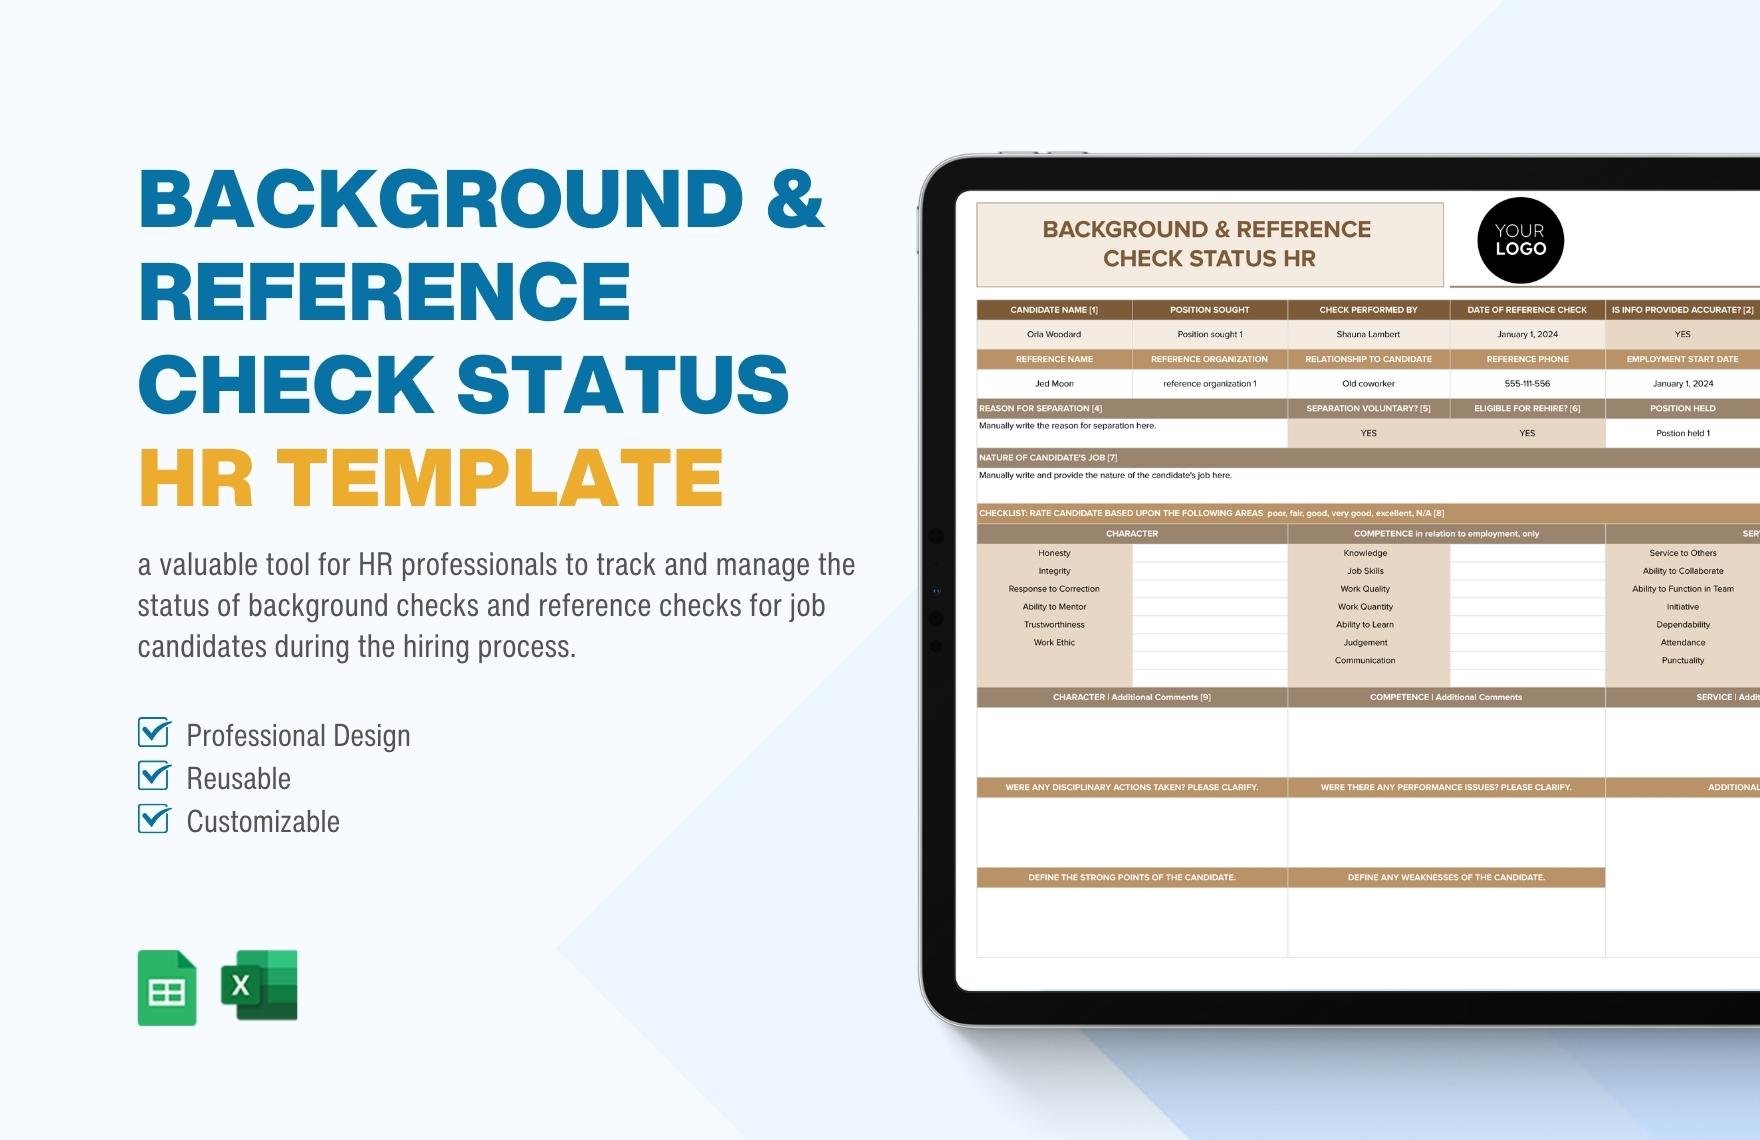 Background & Reference Check Status HR Template in Excel, Google Sheets